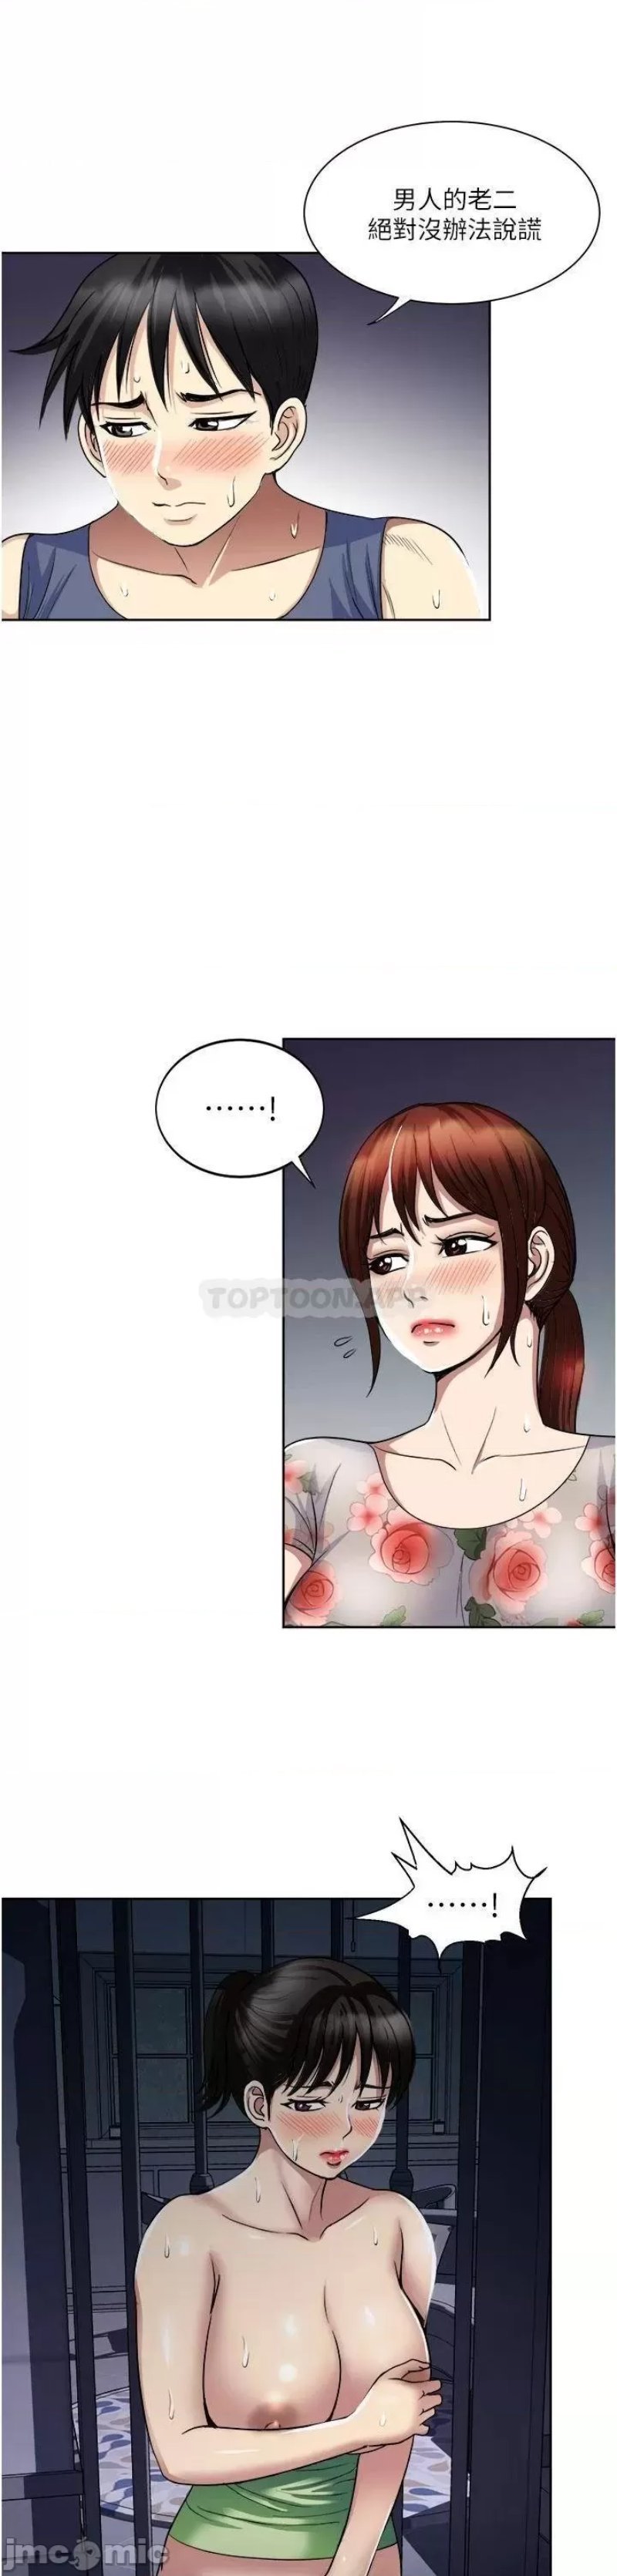 just-once-raw-chap-21-22